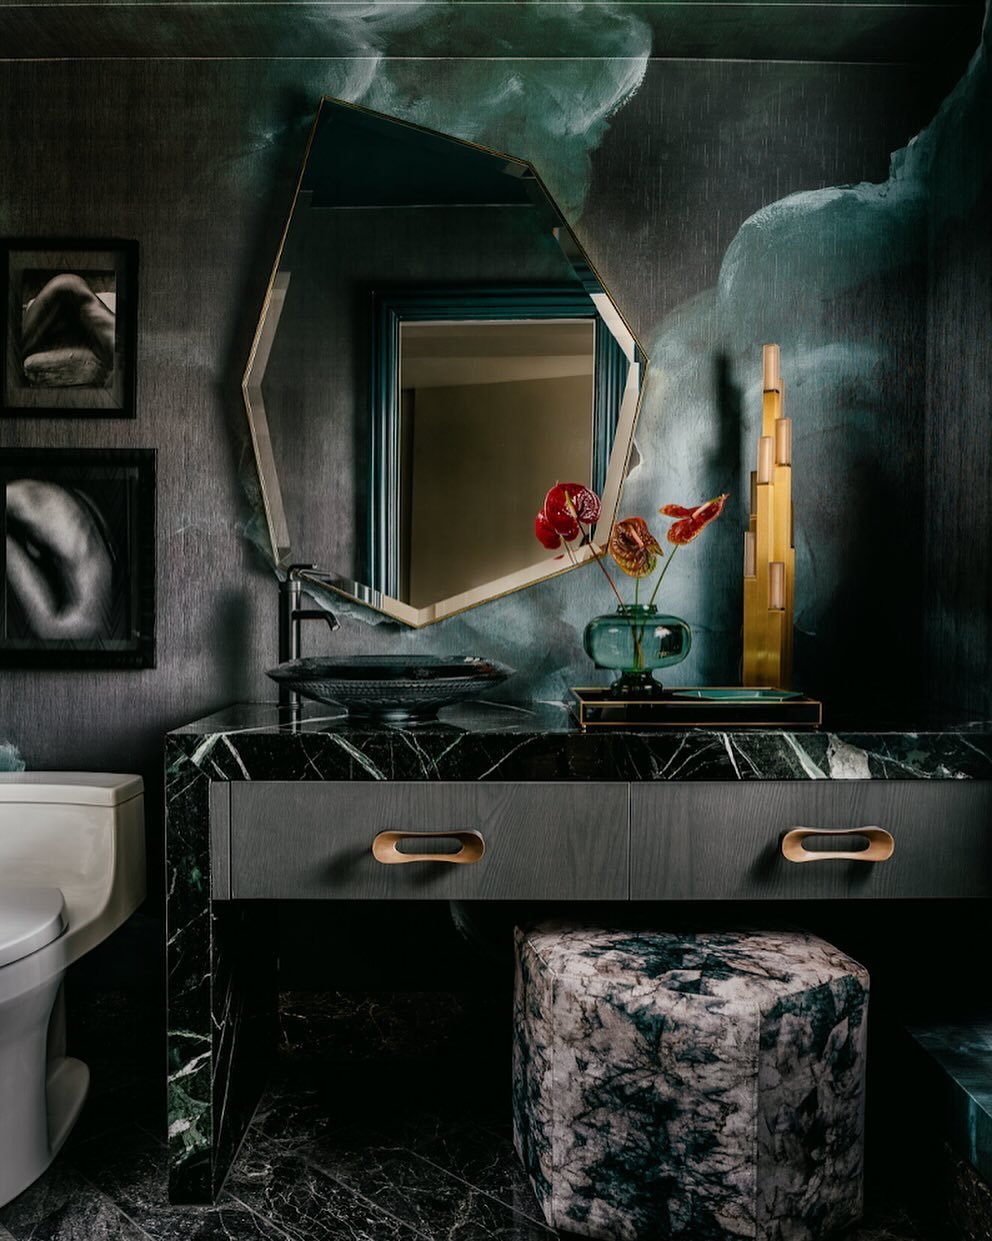 &ldquo;Every room begins with a pilot, and for this bathroom we started with the deep green clouds in the wall covering.&rdquo; The deep green of the Verdi Alpi  marble on the vanity and the organic movement in the wallpaper create richly layered spa